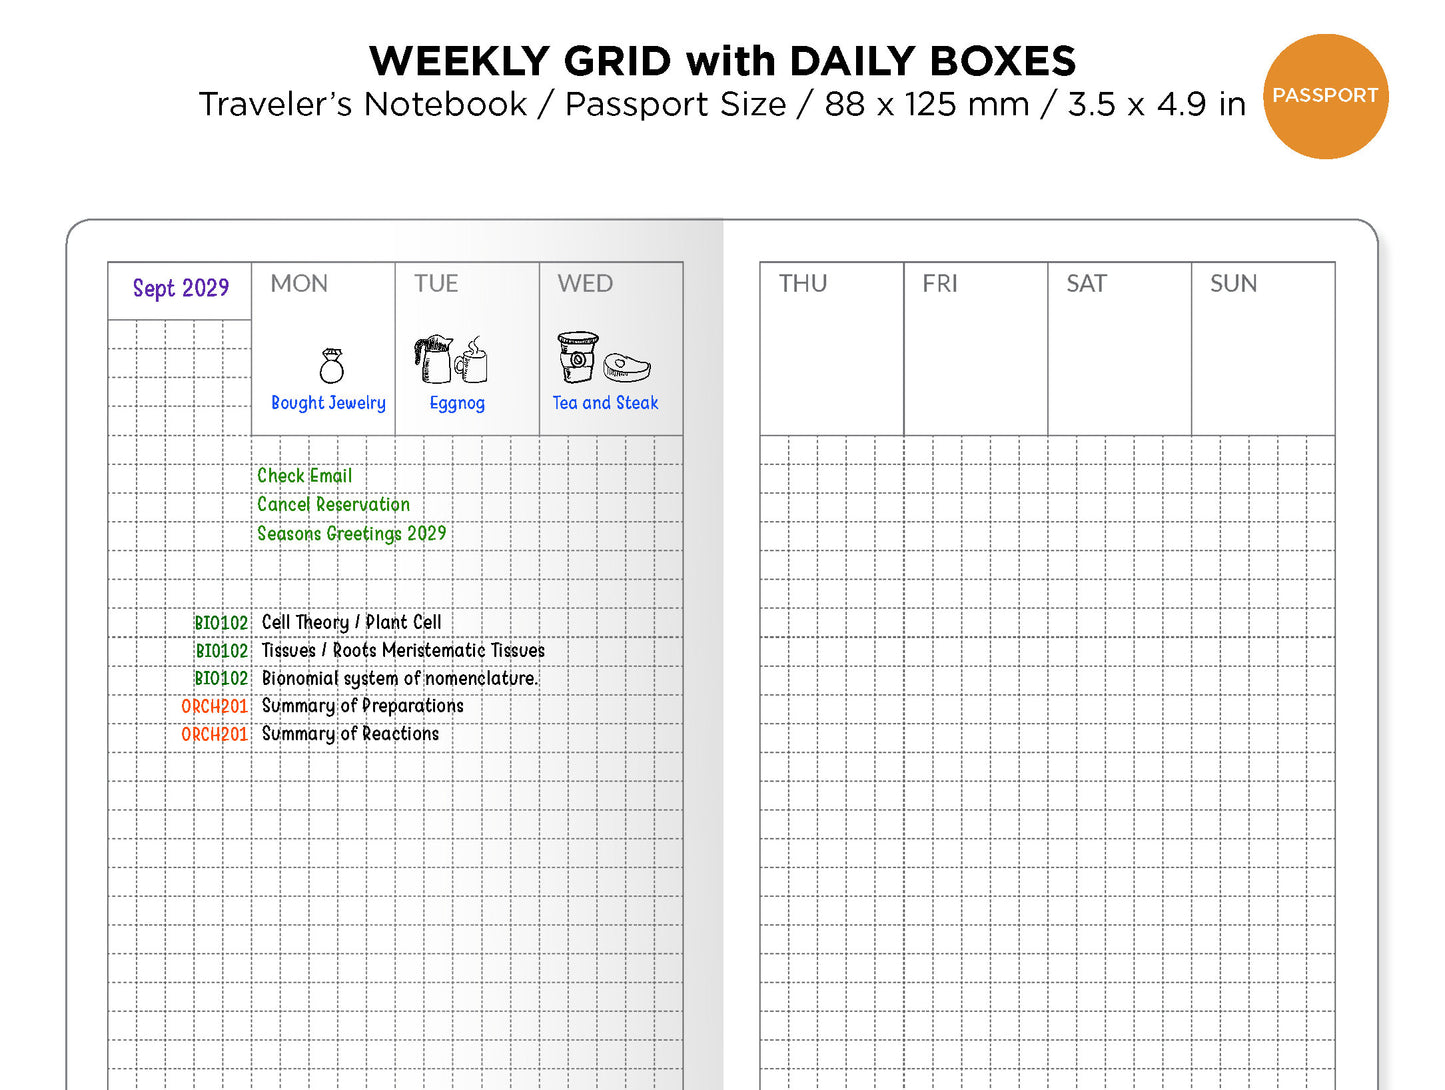 PASSPORT Weekly Grid with DAILY BOXES Printable Insert Traveler's Notebook